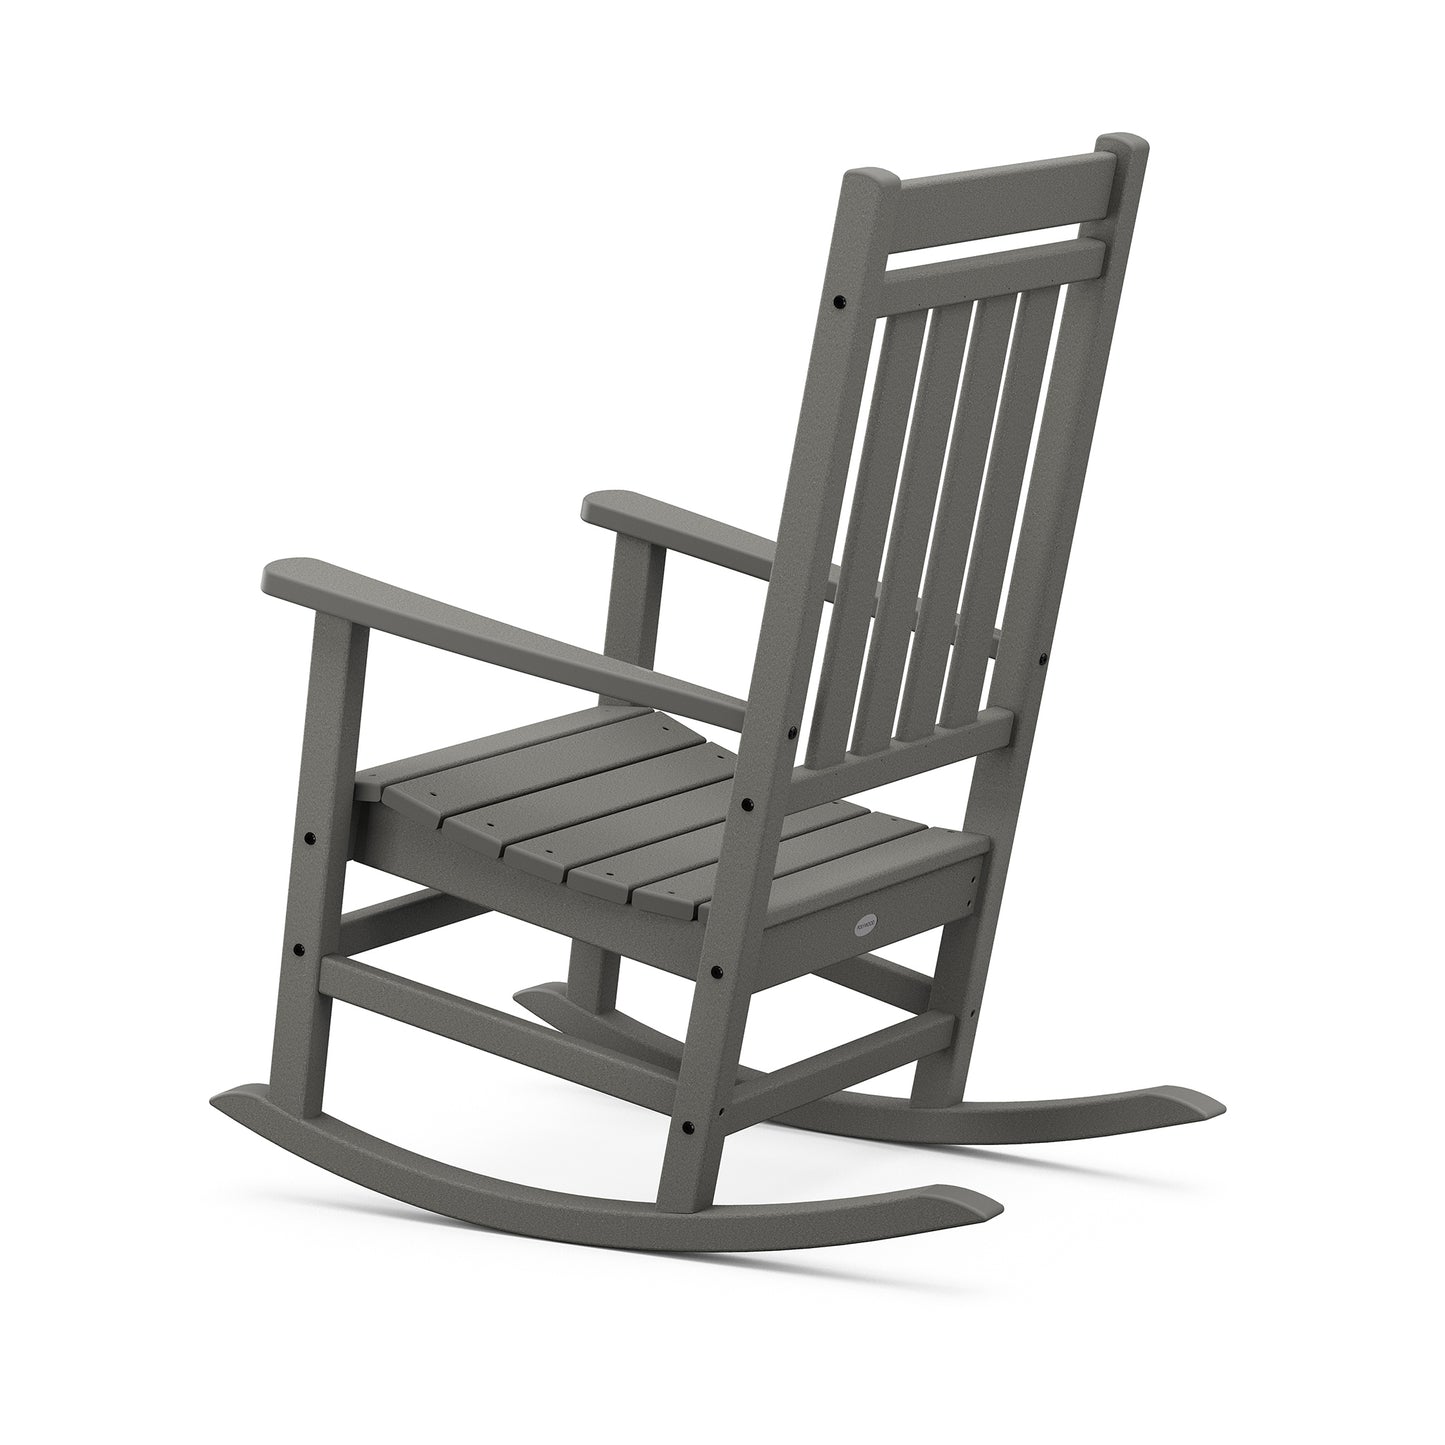 A gray outdoor POLYWOOD Estate Rocking Chair made of POLYWOOD® synthetic material, featuring a traditional slatted back and seat design, set against a plain white background.